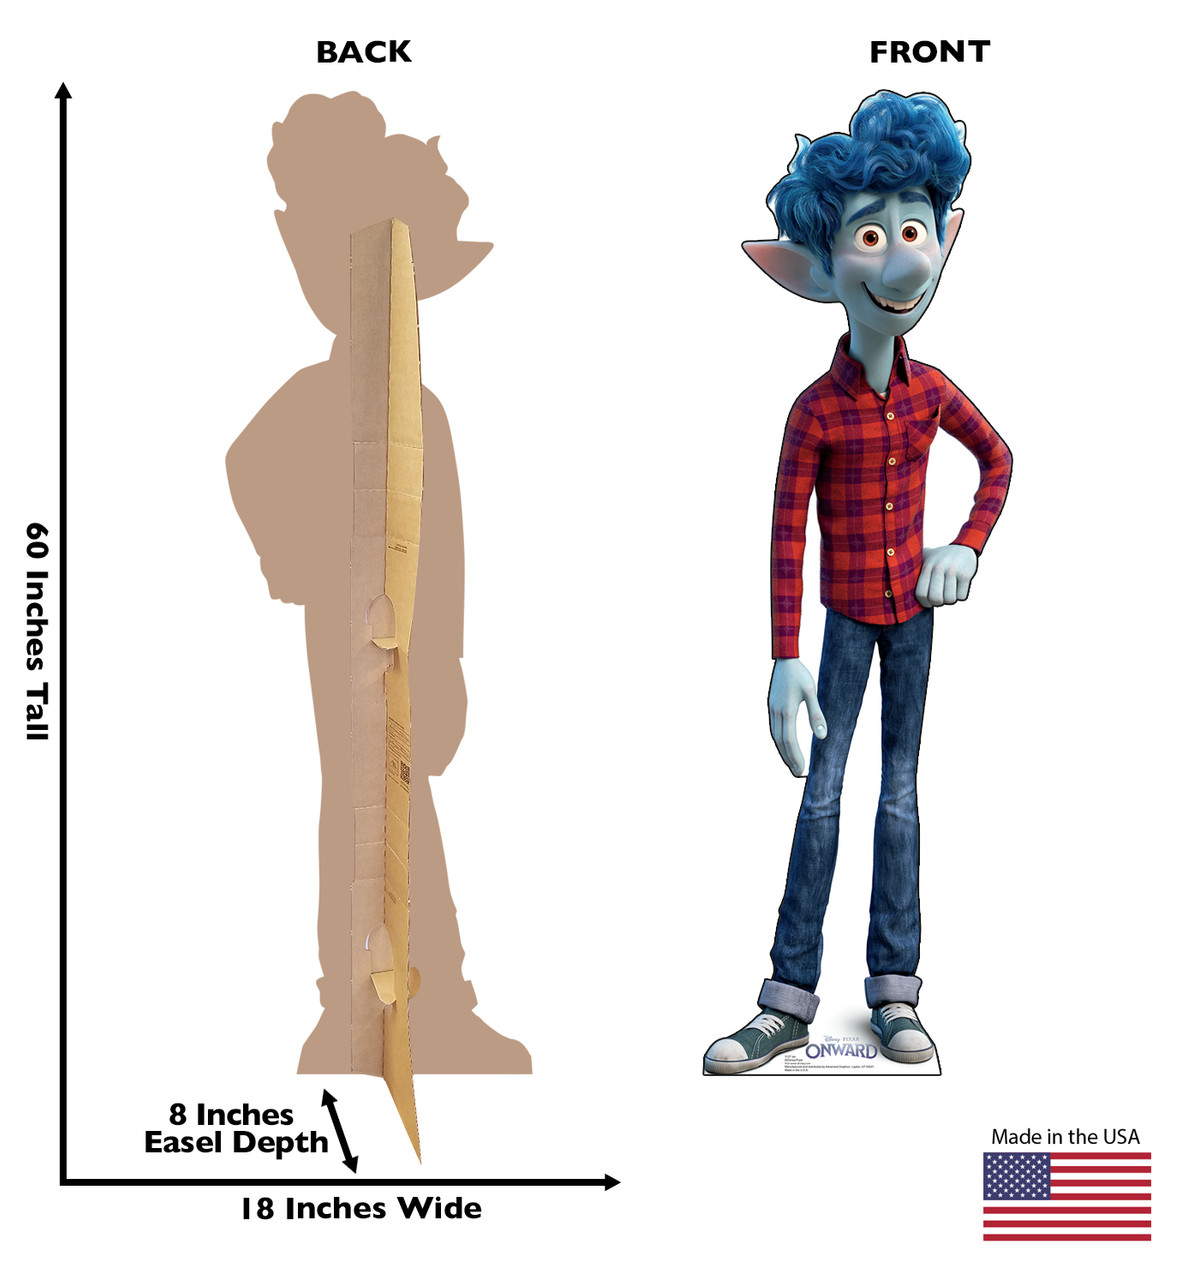 Life-size cardboard standee of Ian from Disney/Pixar's film Onward with front and back dimensions.